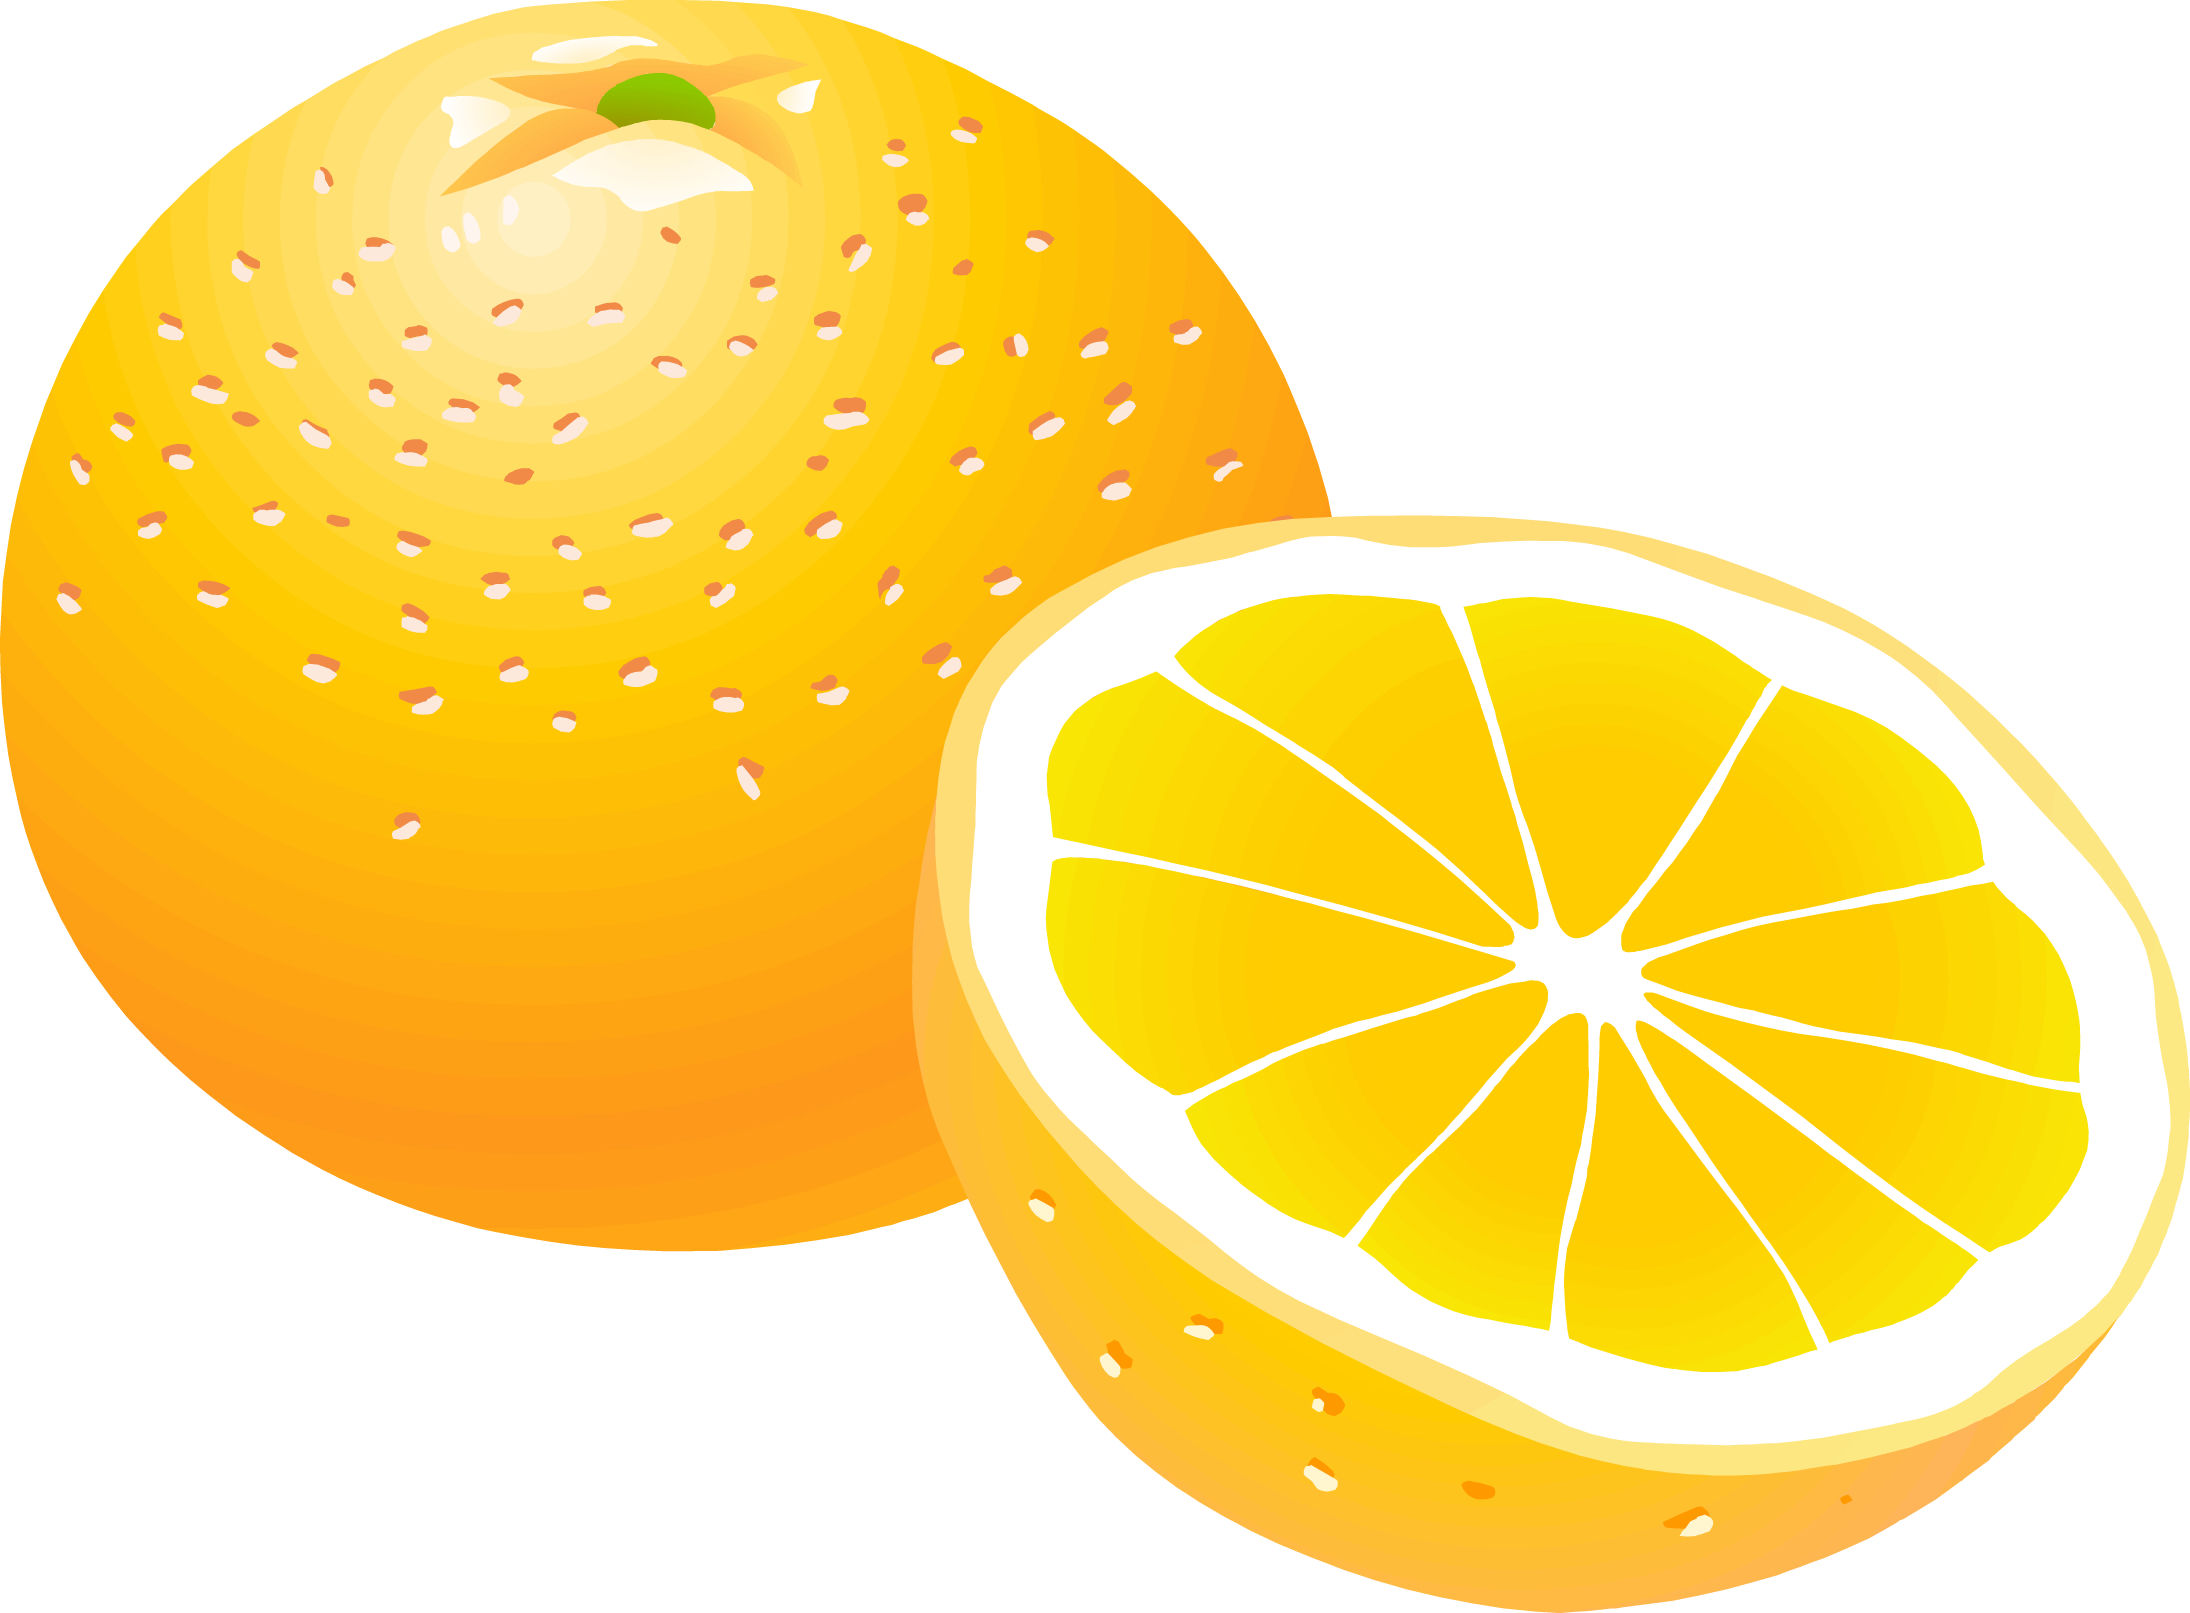 Orange Clipart Images & Pictures - Becuo